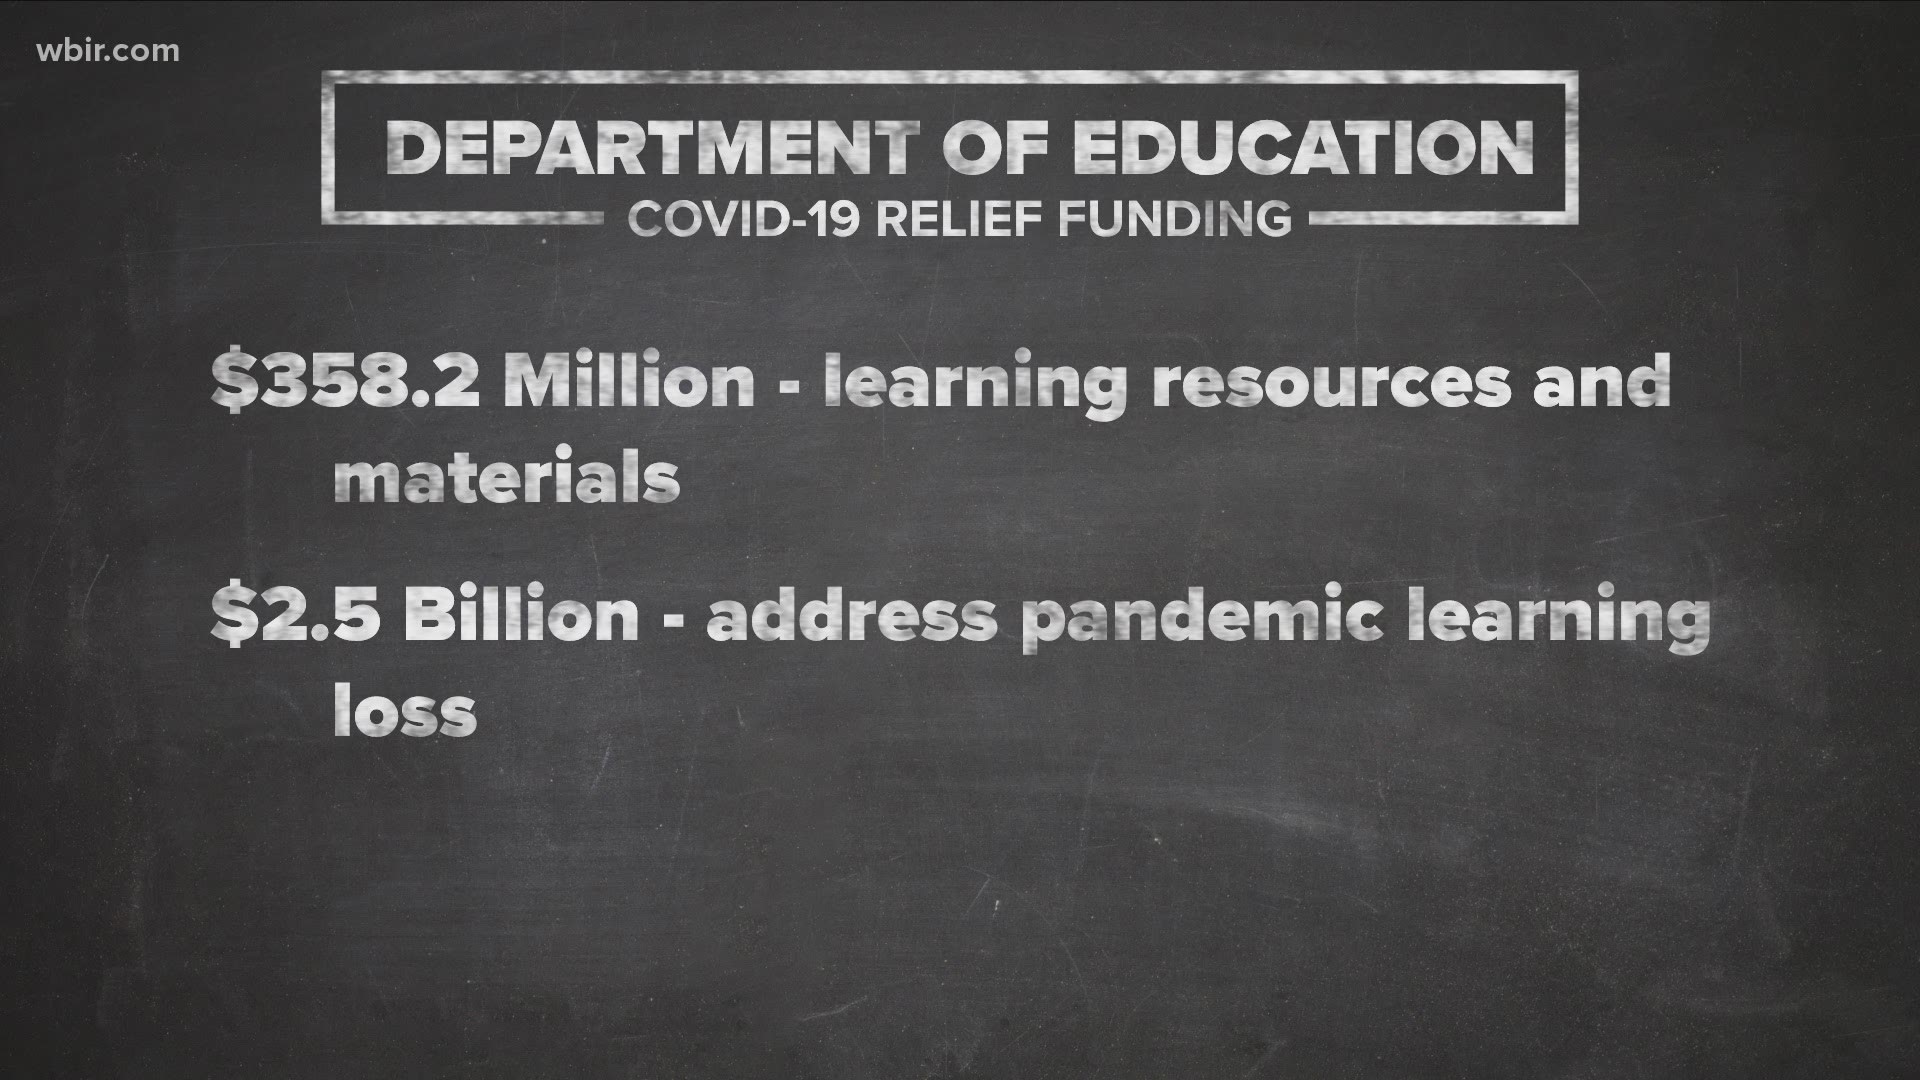 The state said it will spend $2.5 billion to address learning loss tied to the COVID-19 pandemic.